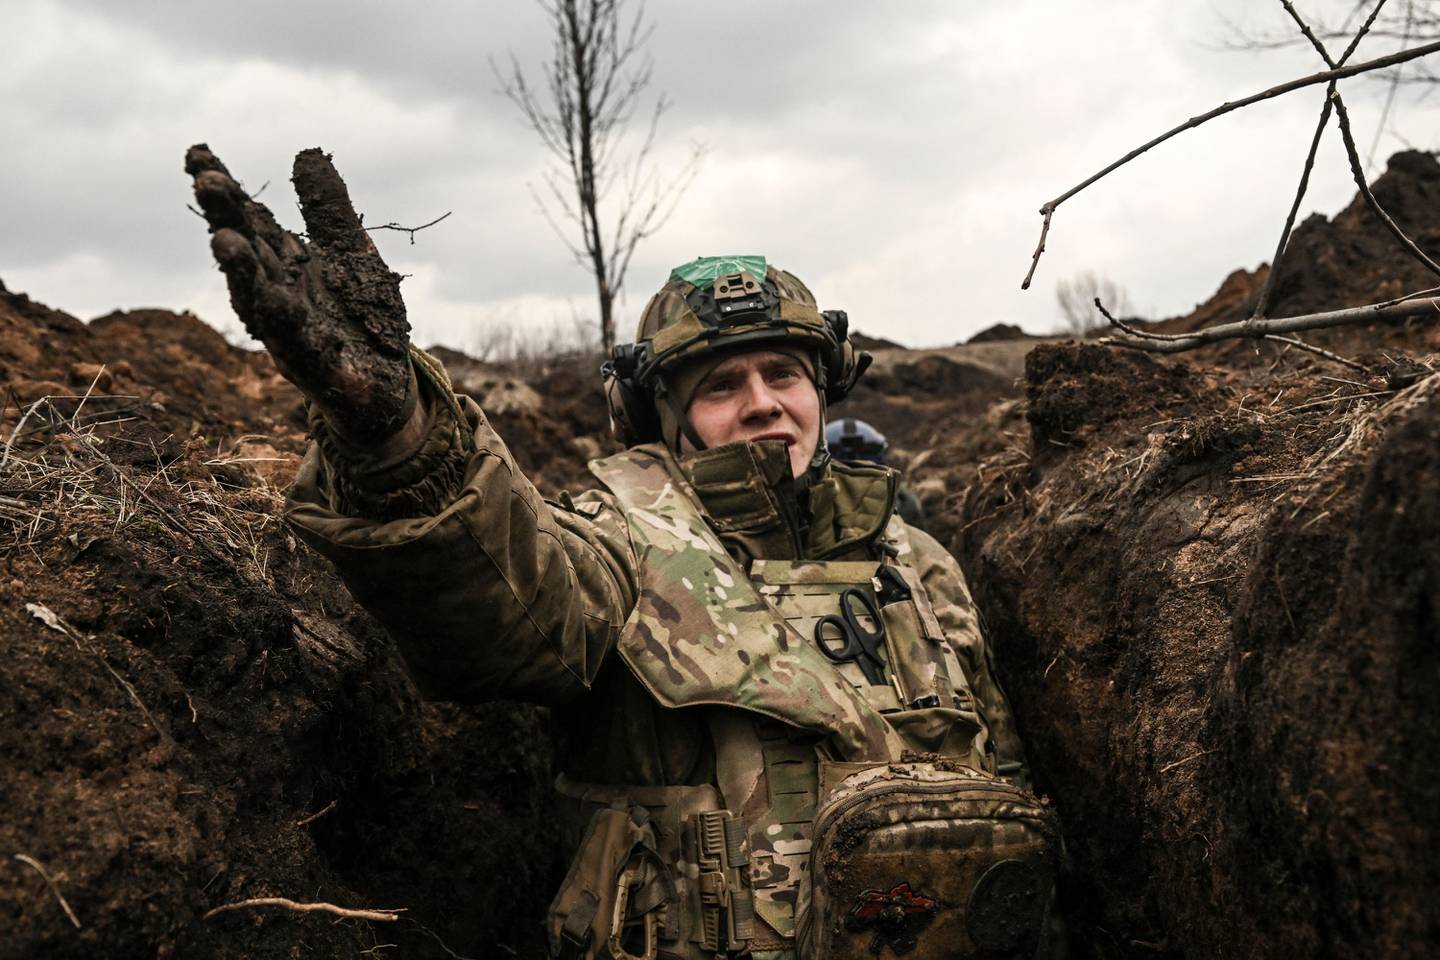 TOPSHOT - A Ukrainian serviceman takes cover in a trench near Bakhmut in the Donbas region on March 8, 2023. - After a cold and snowy winter, the arrival of spring with rain and milder temperatures has brought back the mud on the Donbas battle fields.